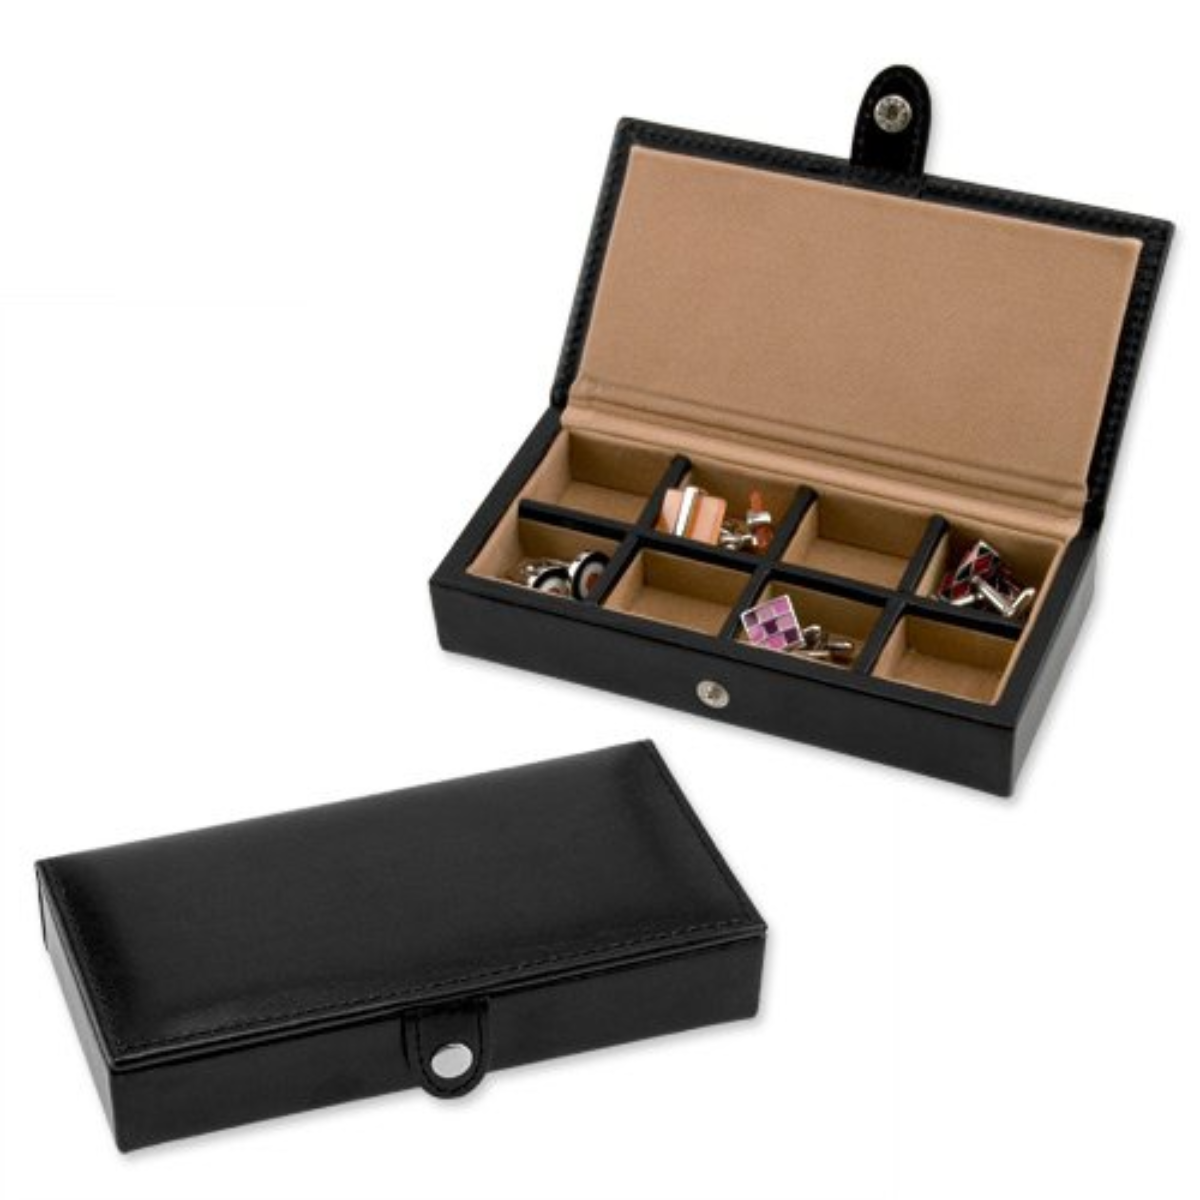 23. Leather Cufflinks Case: A Stylish 3rd Anniversary Gift for Him